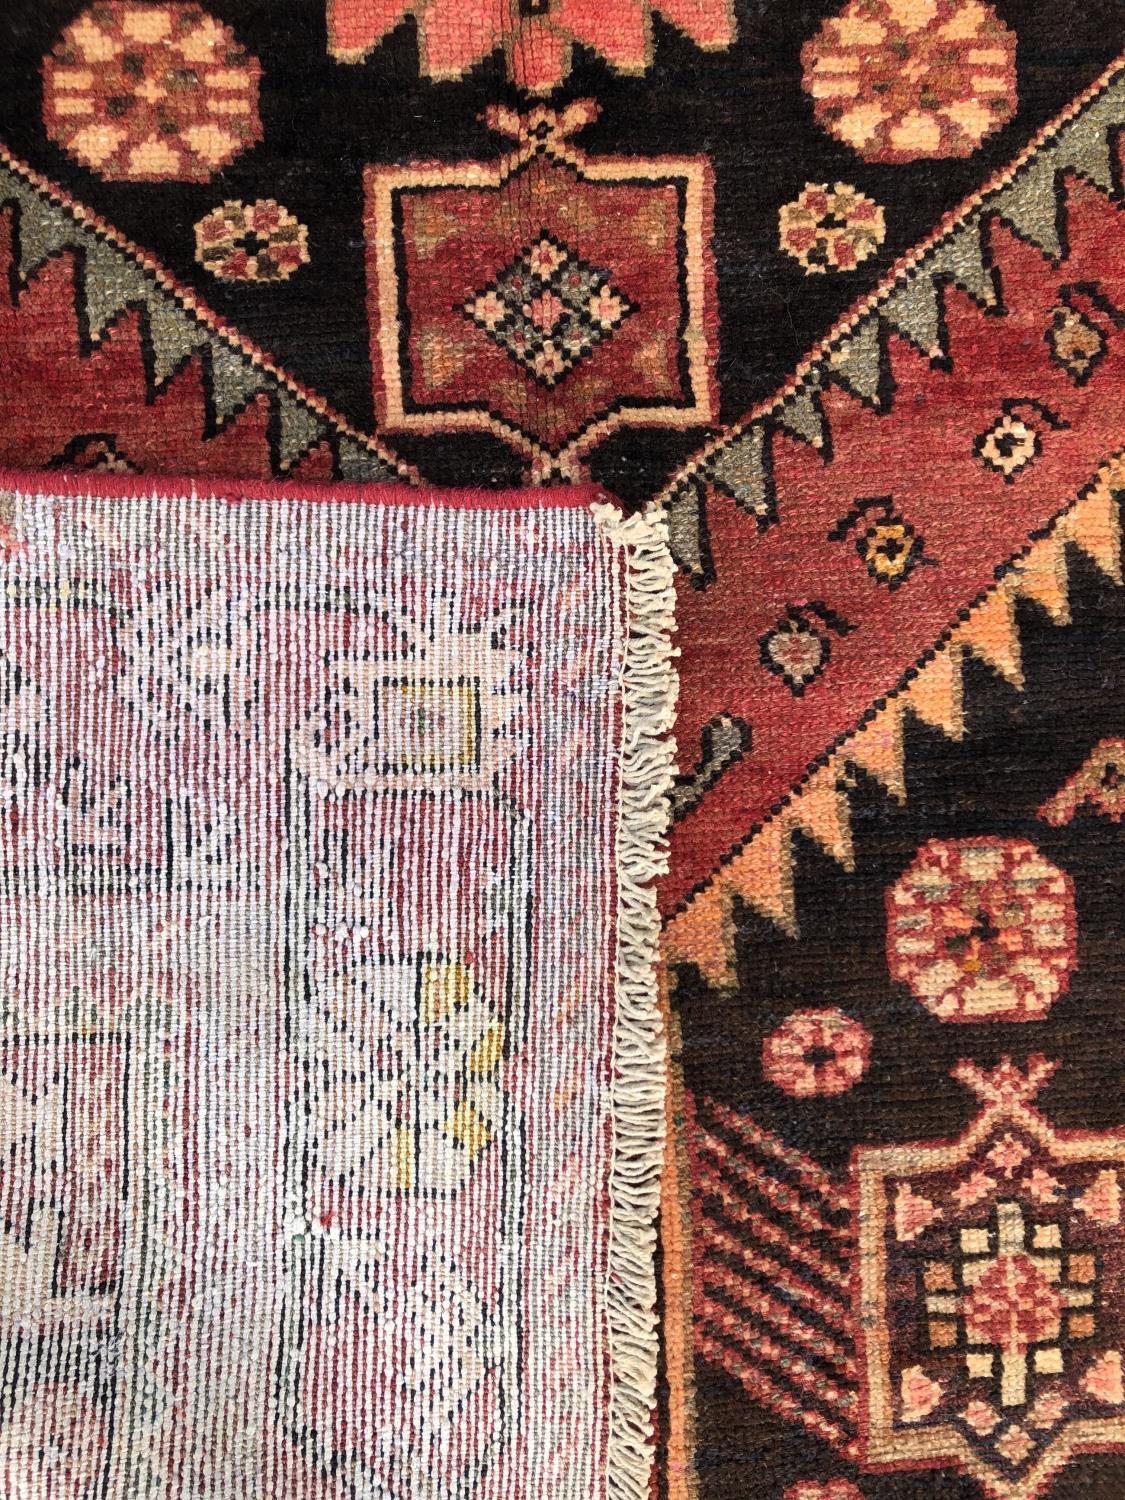 A Zanjan rug with a central geometric motif with radiating stylised flowers, 215cm x 130cm approx - Image 2 of 2